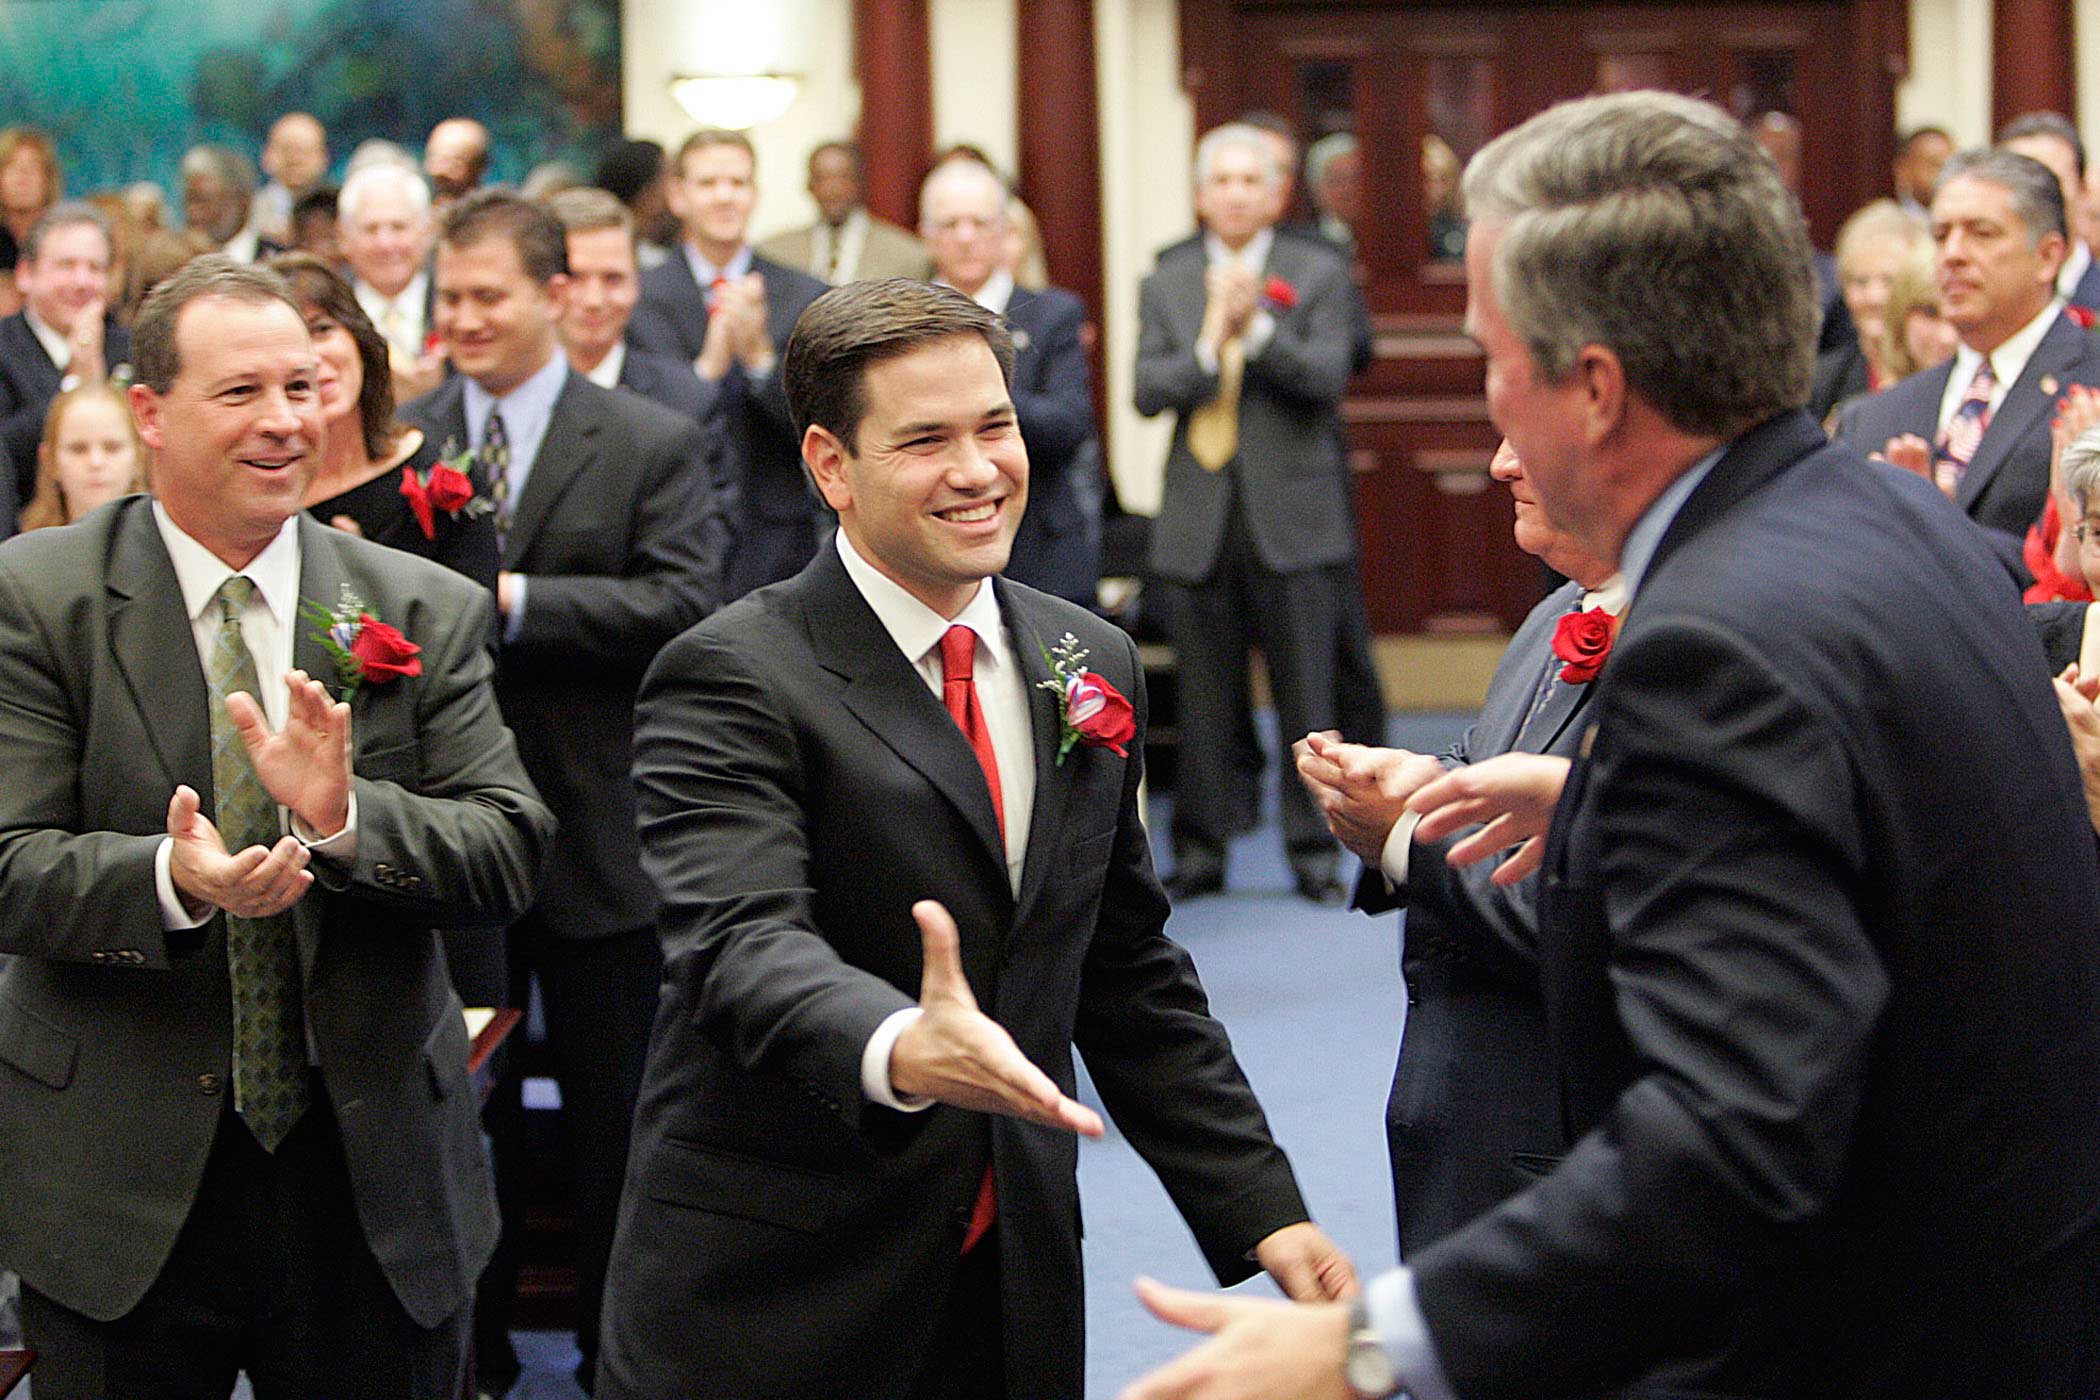 Marco Rubio greets Florida Gov. Jeb Bush, on his way to being sworn in as the new speaker of the Florida House on Nov. 21, 2006, in Tallahassee, Fla.